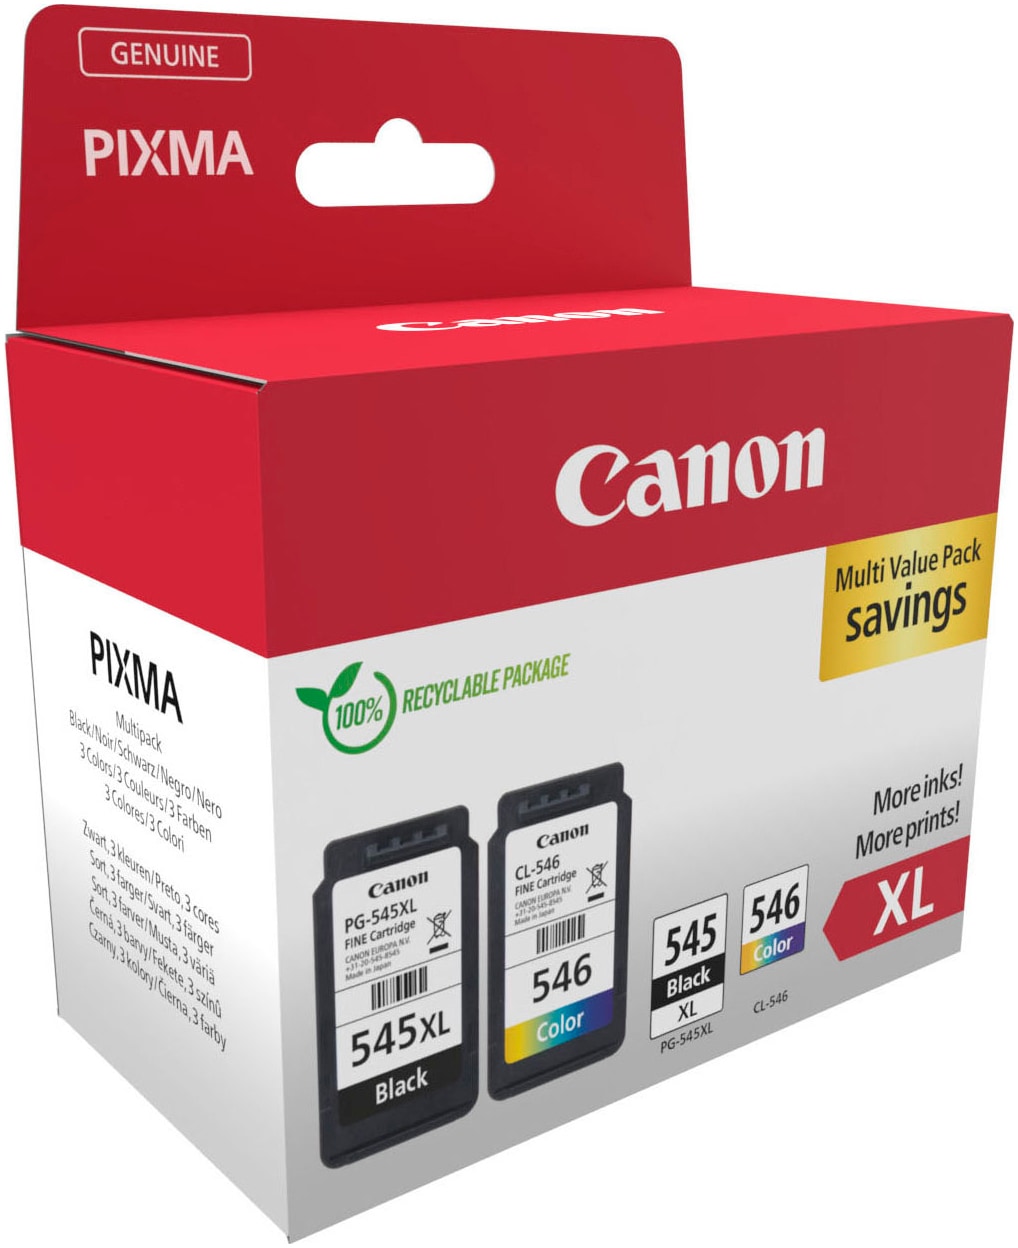 Canon Tintenpatrone »PG-545XL/CL-546XL + Photo Value Pack«, (Packung, 2 St.)